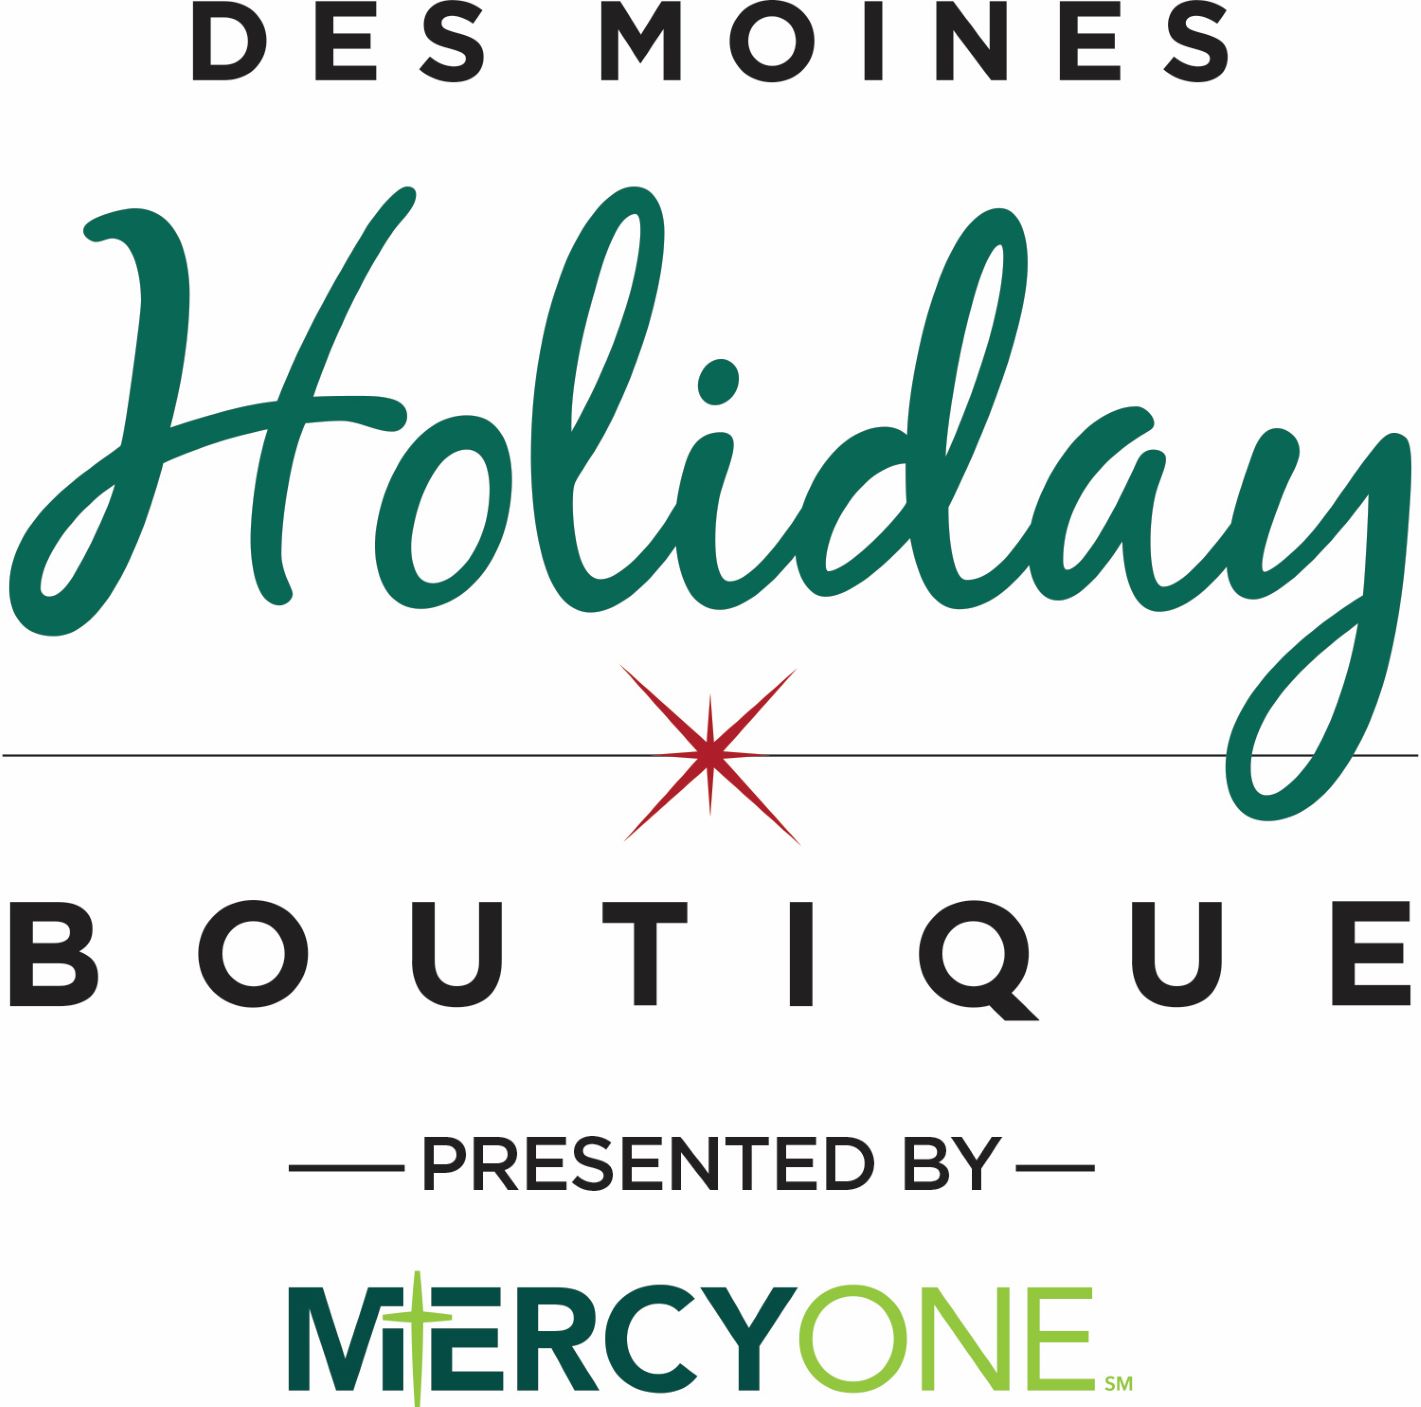 Enter to Win 4 Admission Passes to The Des Moines Holiday Boutique!